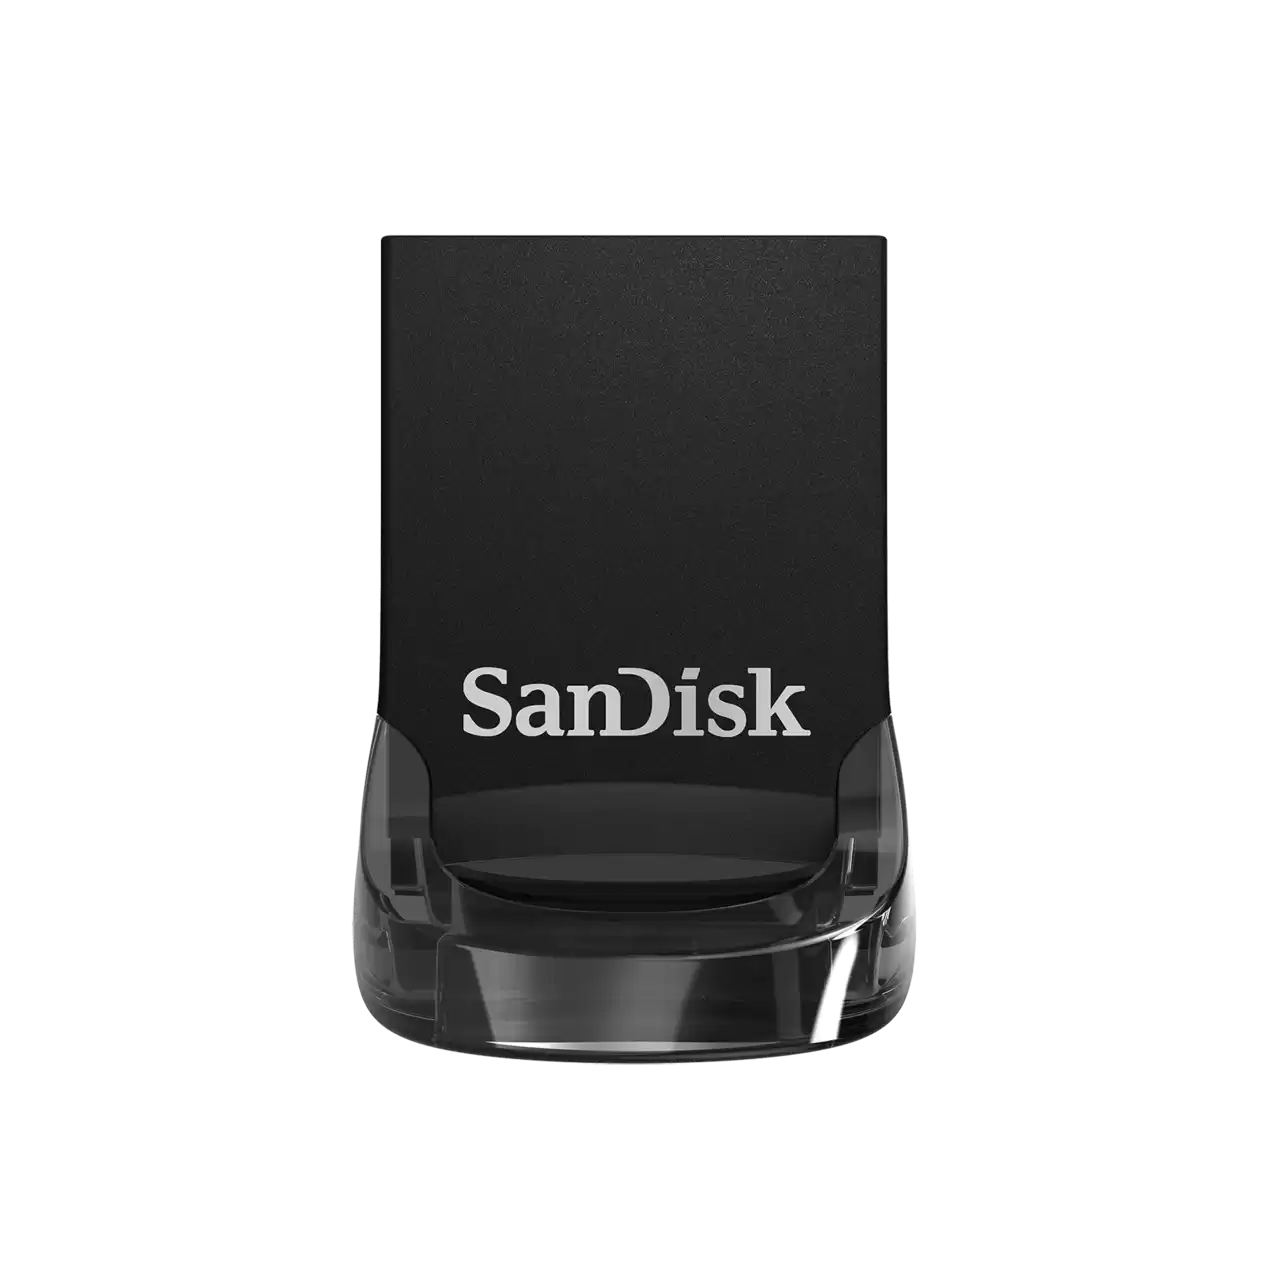 Sandisk PenDrive 32Gb 3.2 Ultra Fit USB SDCZ430-032G-G4